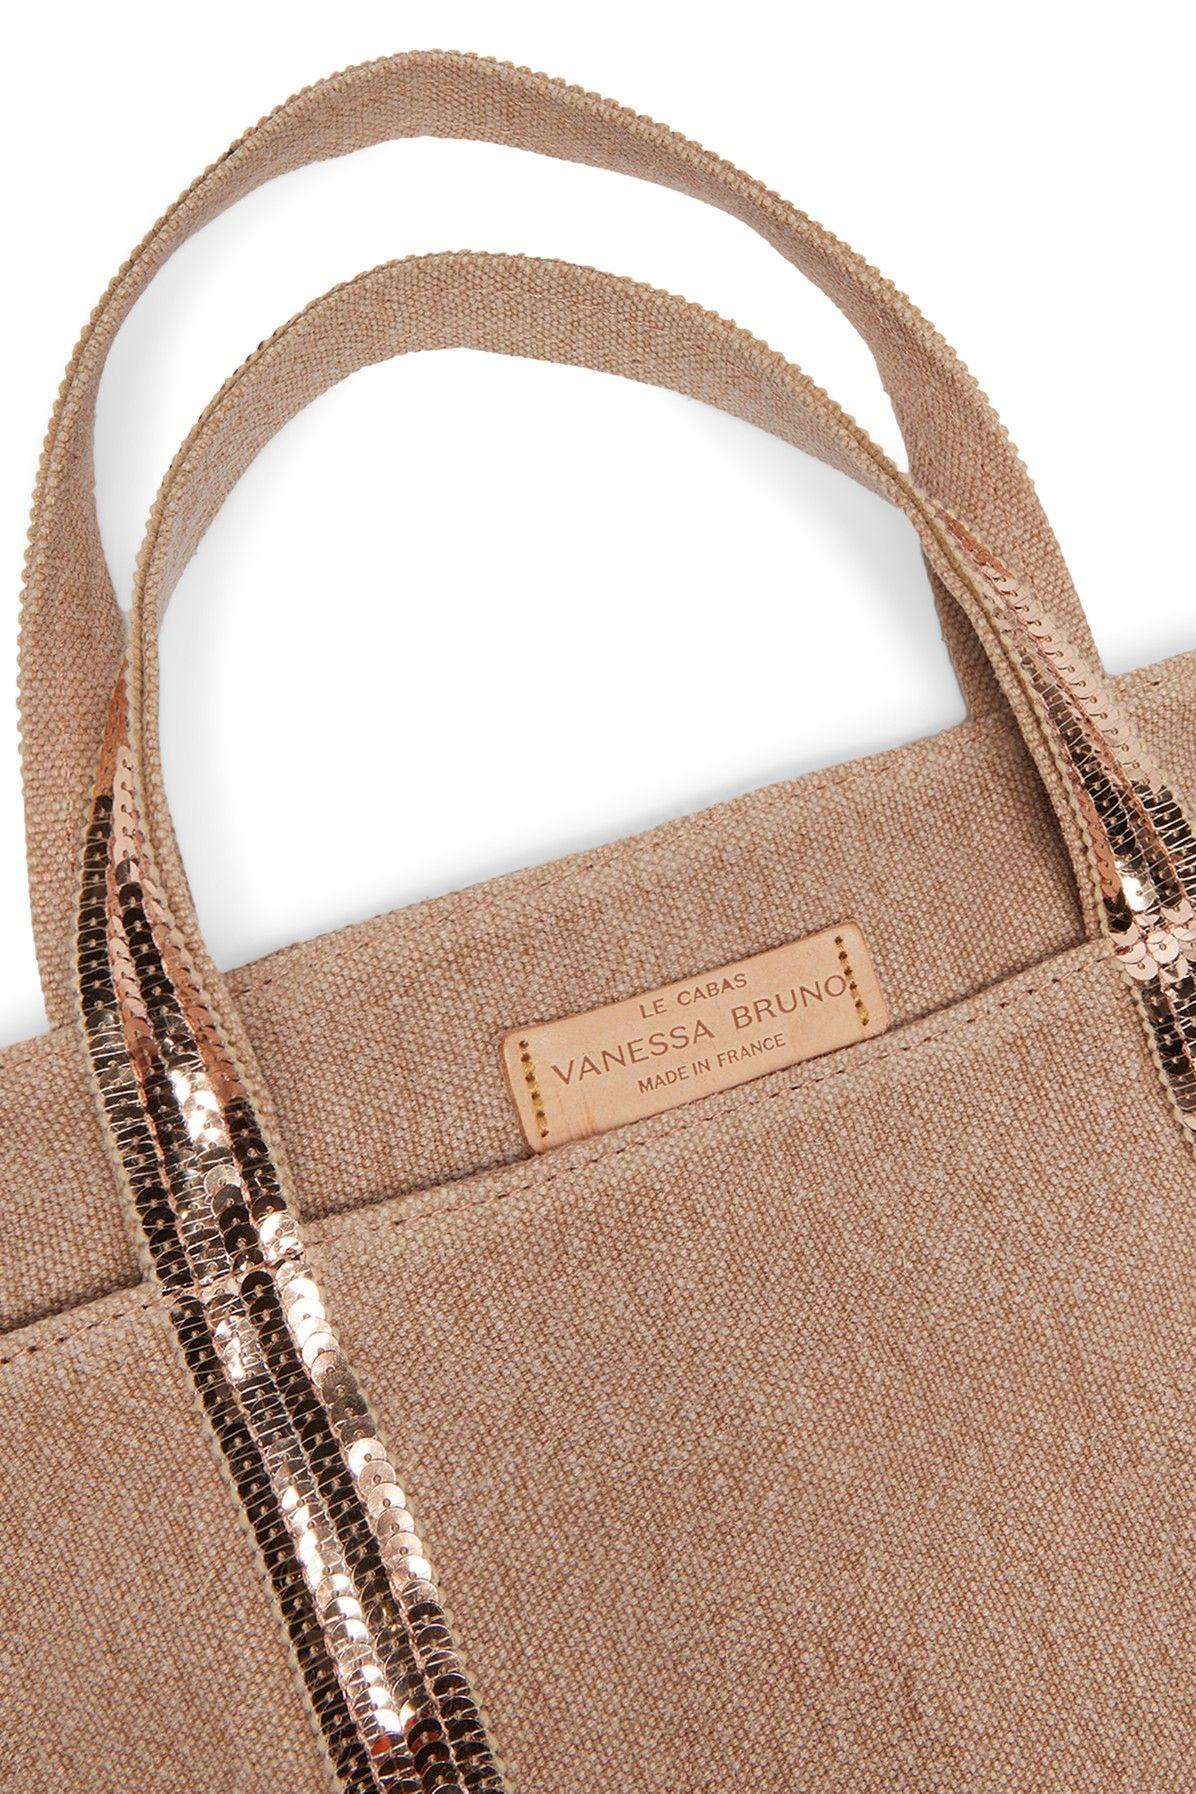 Vanessa Bruno Linen M Cabas Tote Bag in Natural | Lyst